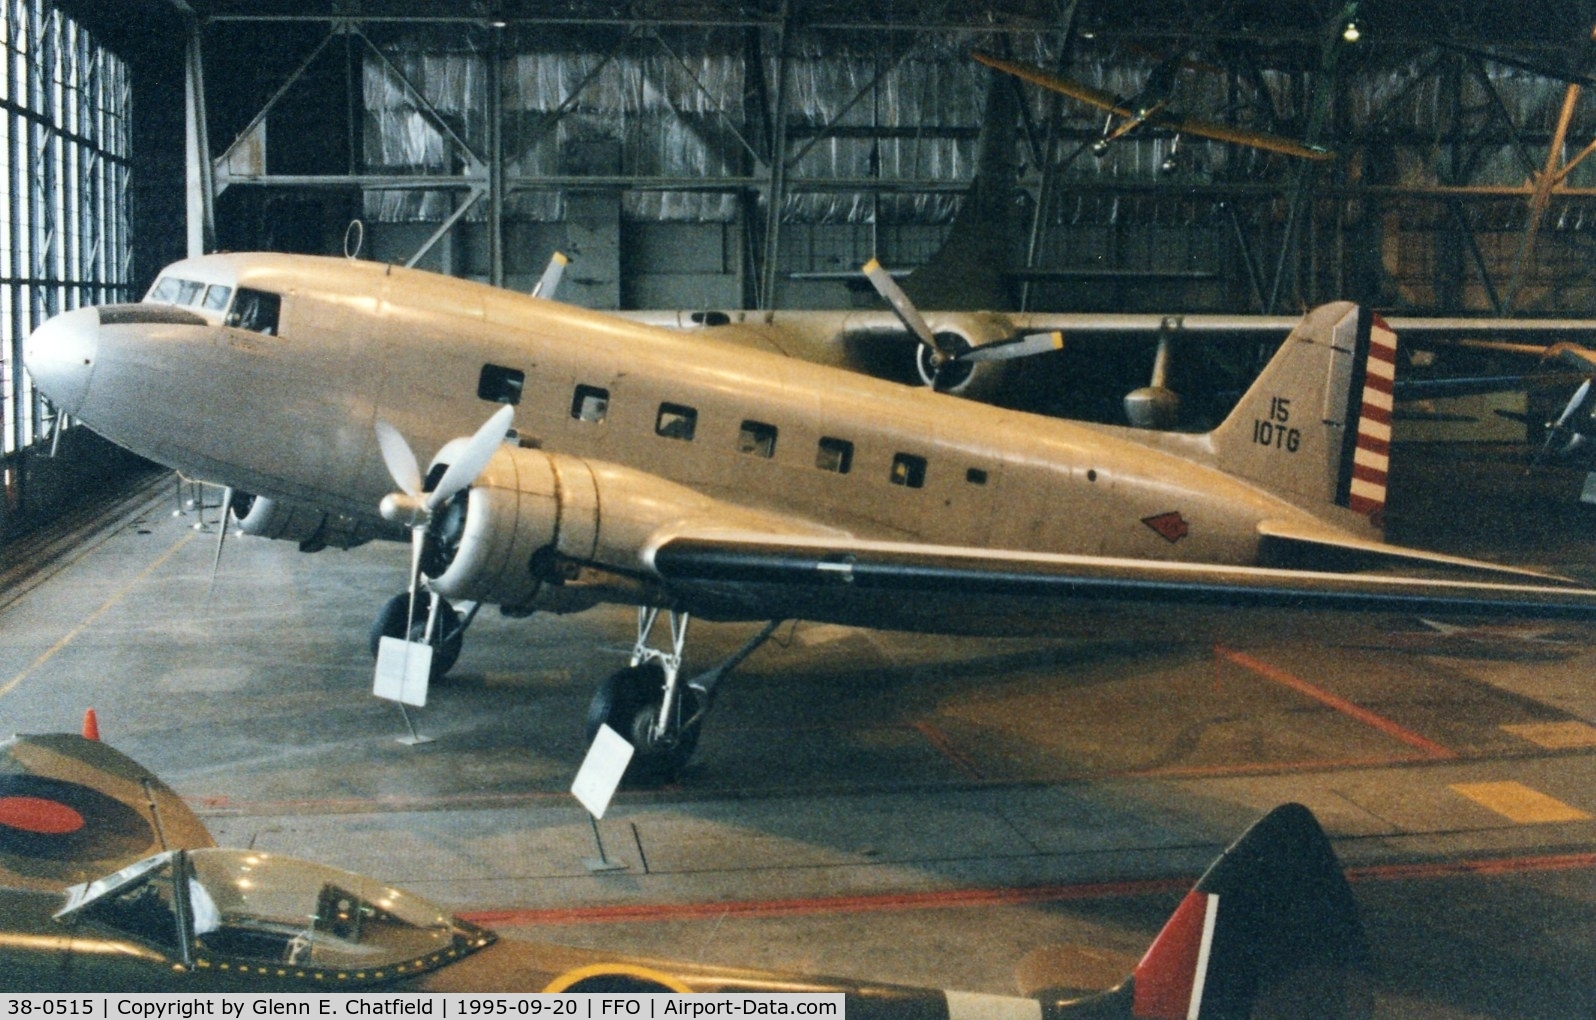 38-0515, 1938 Douglas C-39 C/N 2072, C-39 at the National Museum of the U.S. Air Force